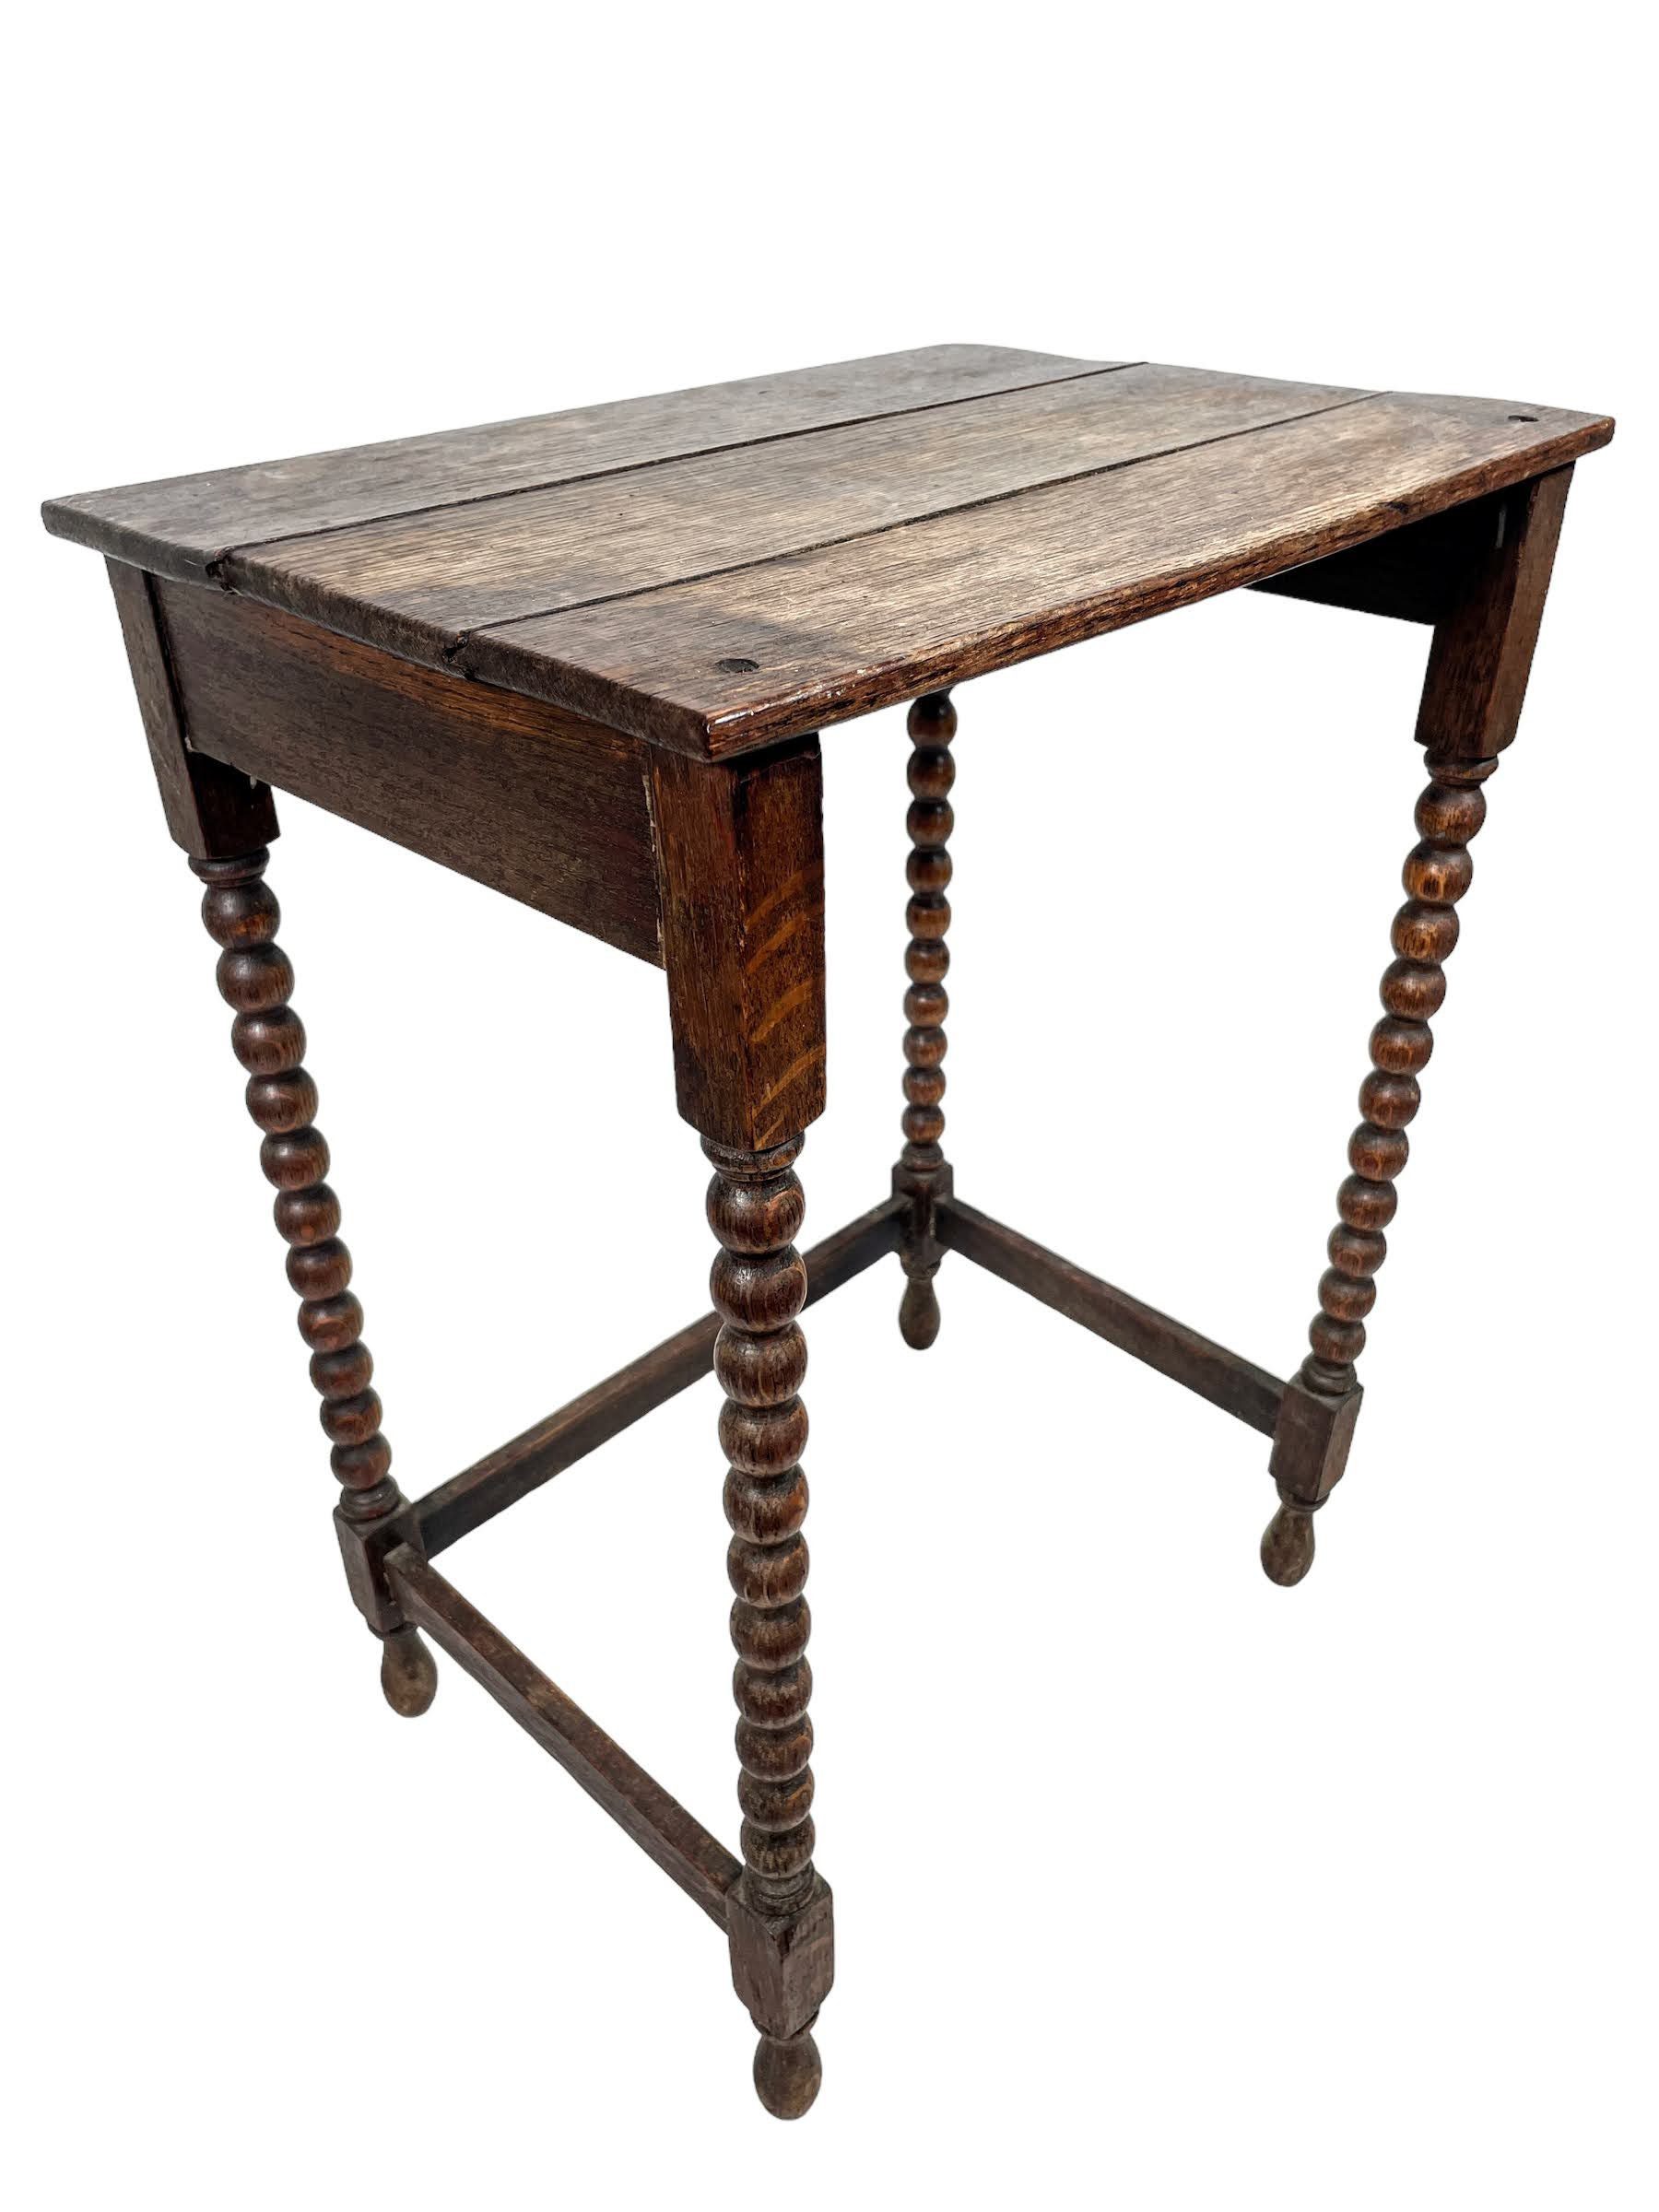 Small Rectangular Antique Low Side Table